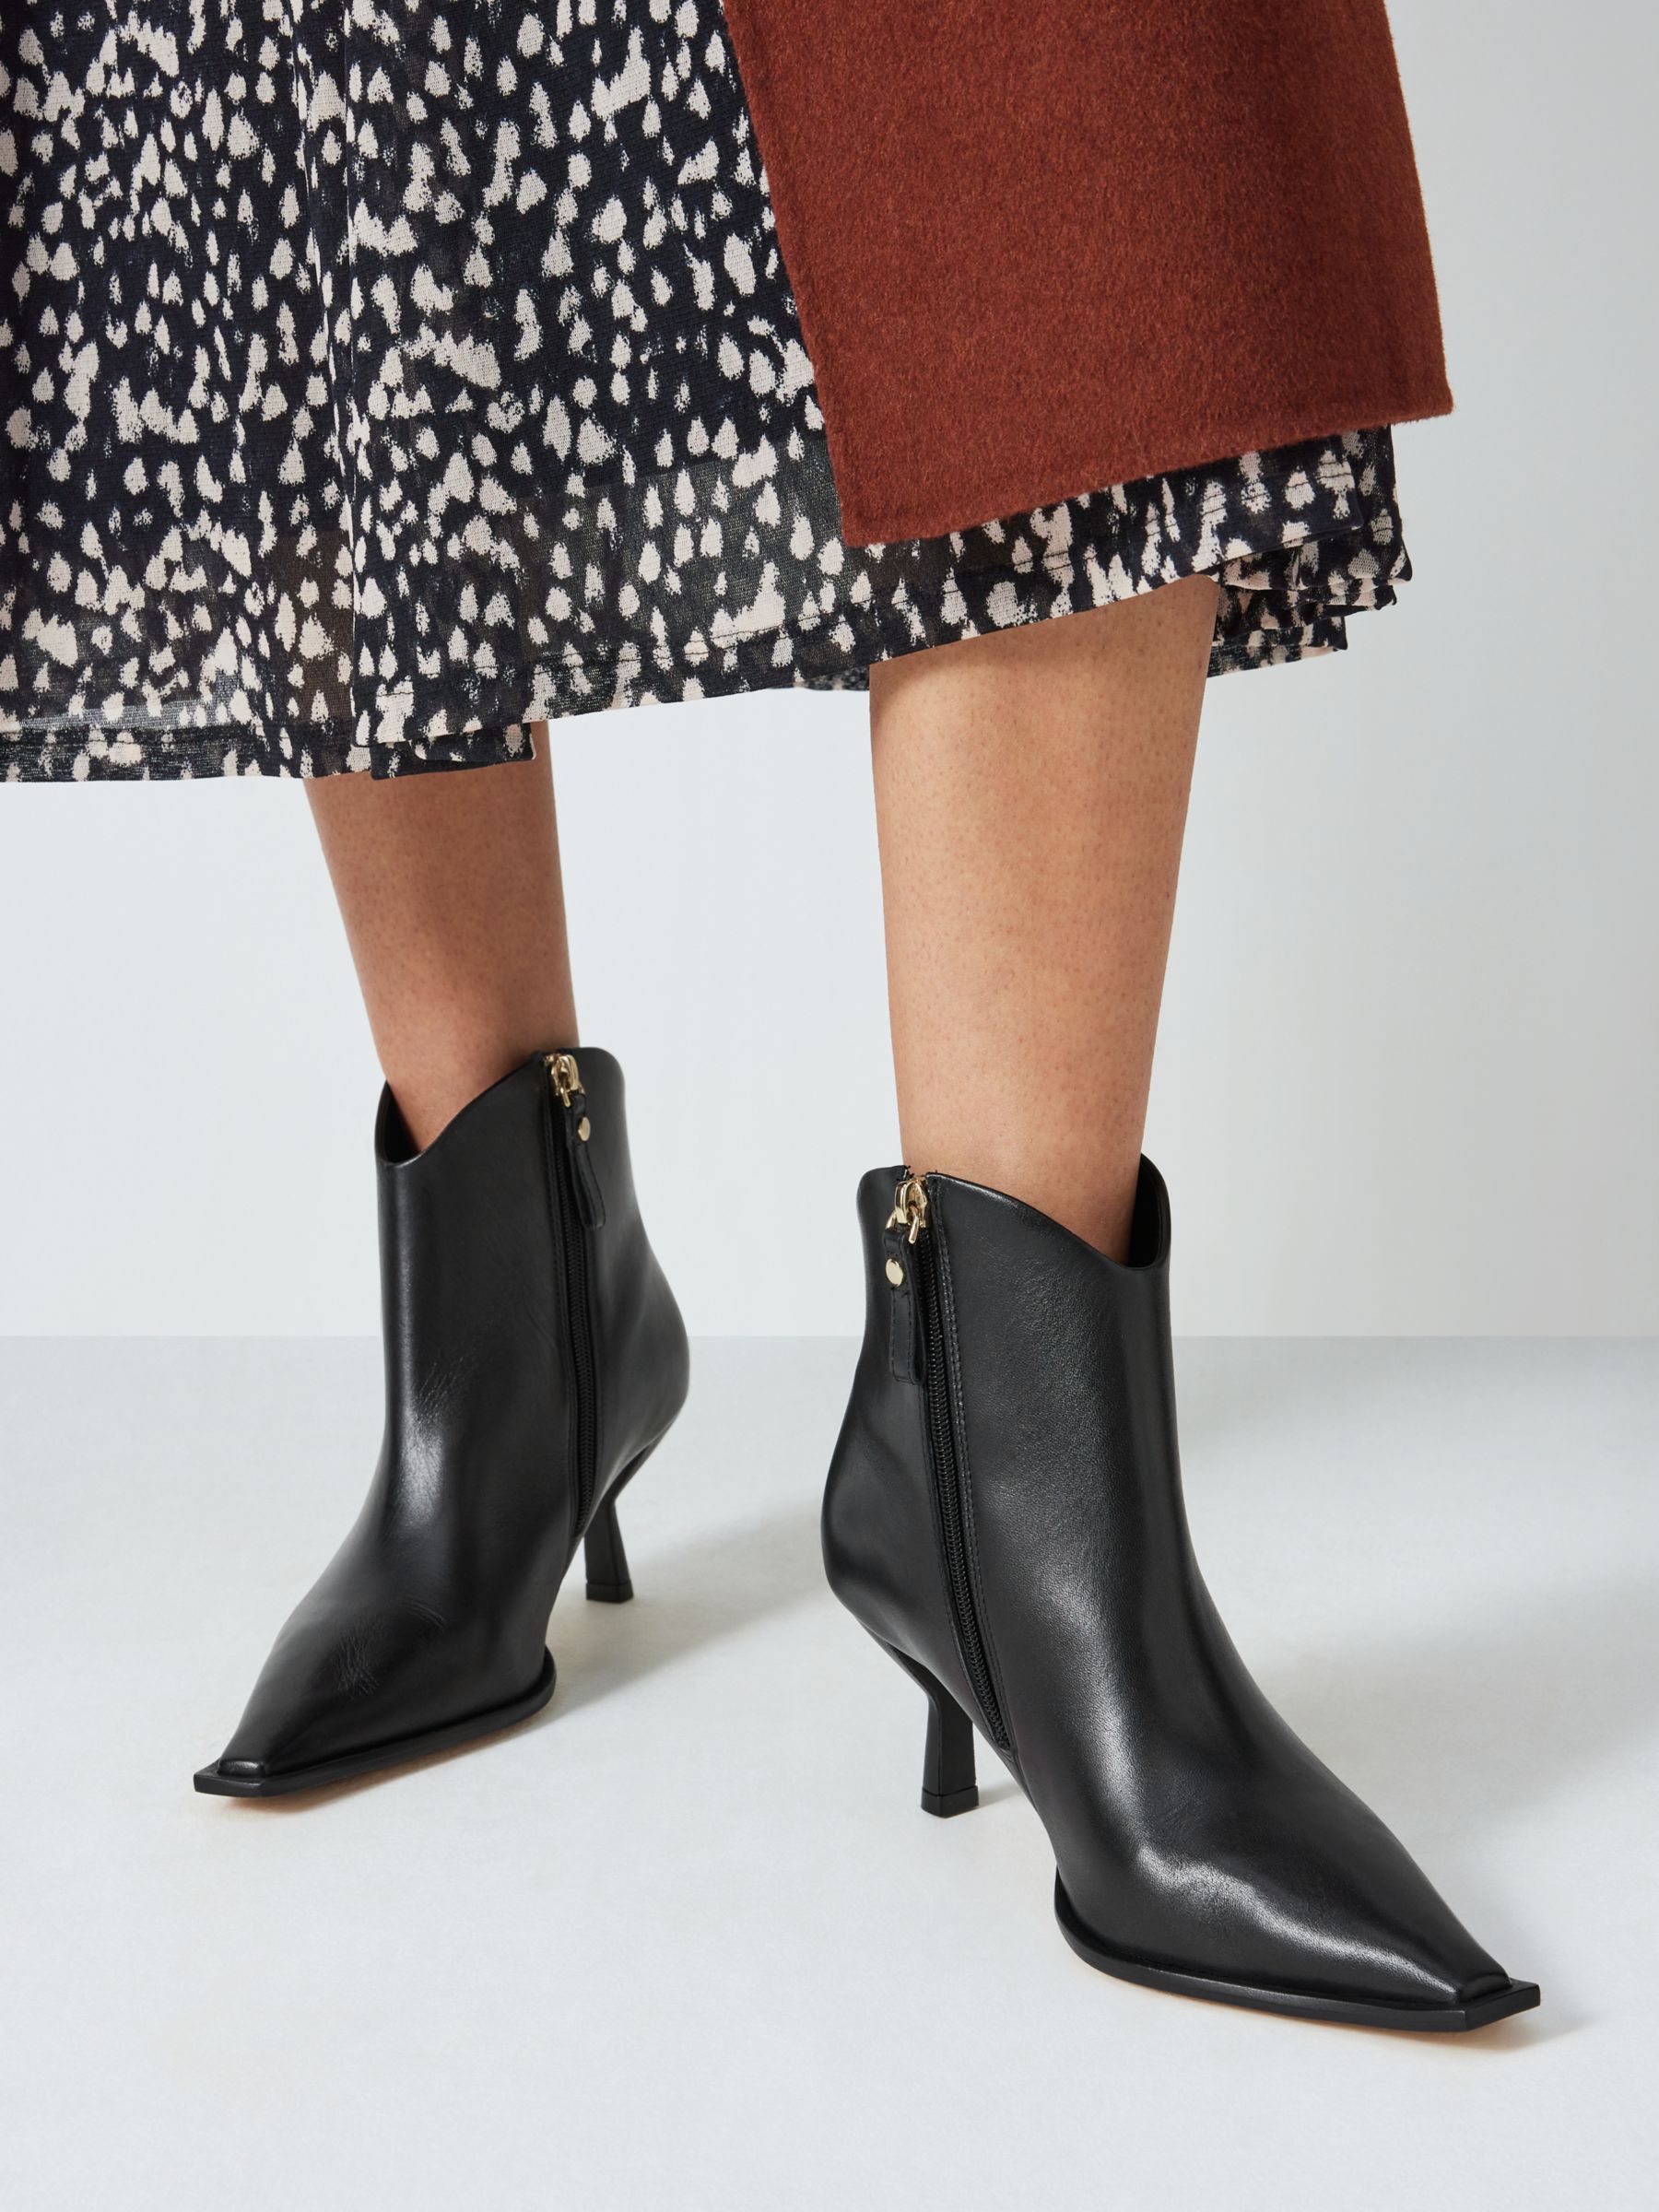 Buy John Lewis Panama Leather Dressy Western Ankle Boots Online at johnlewis.com